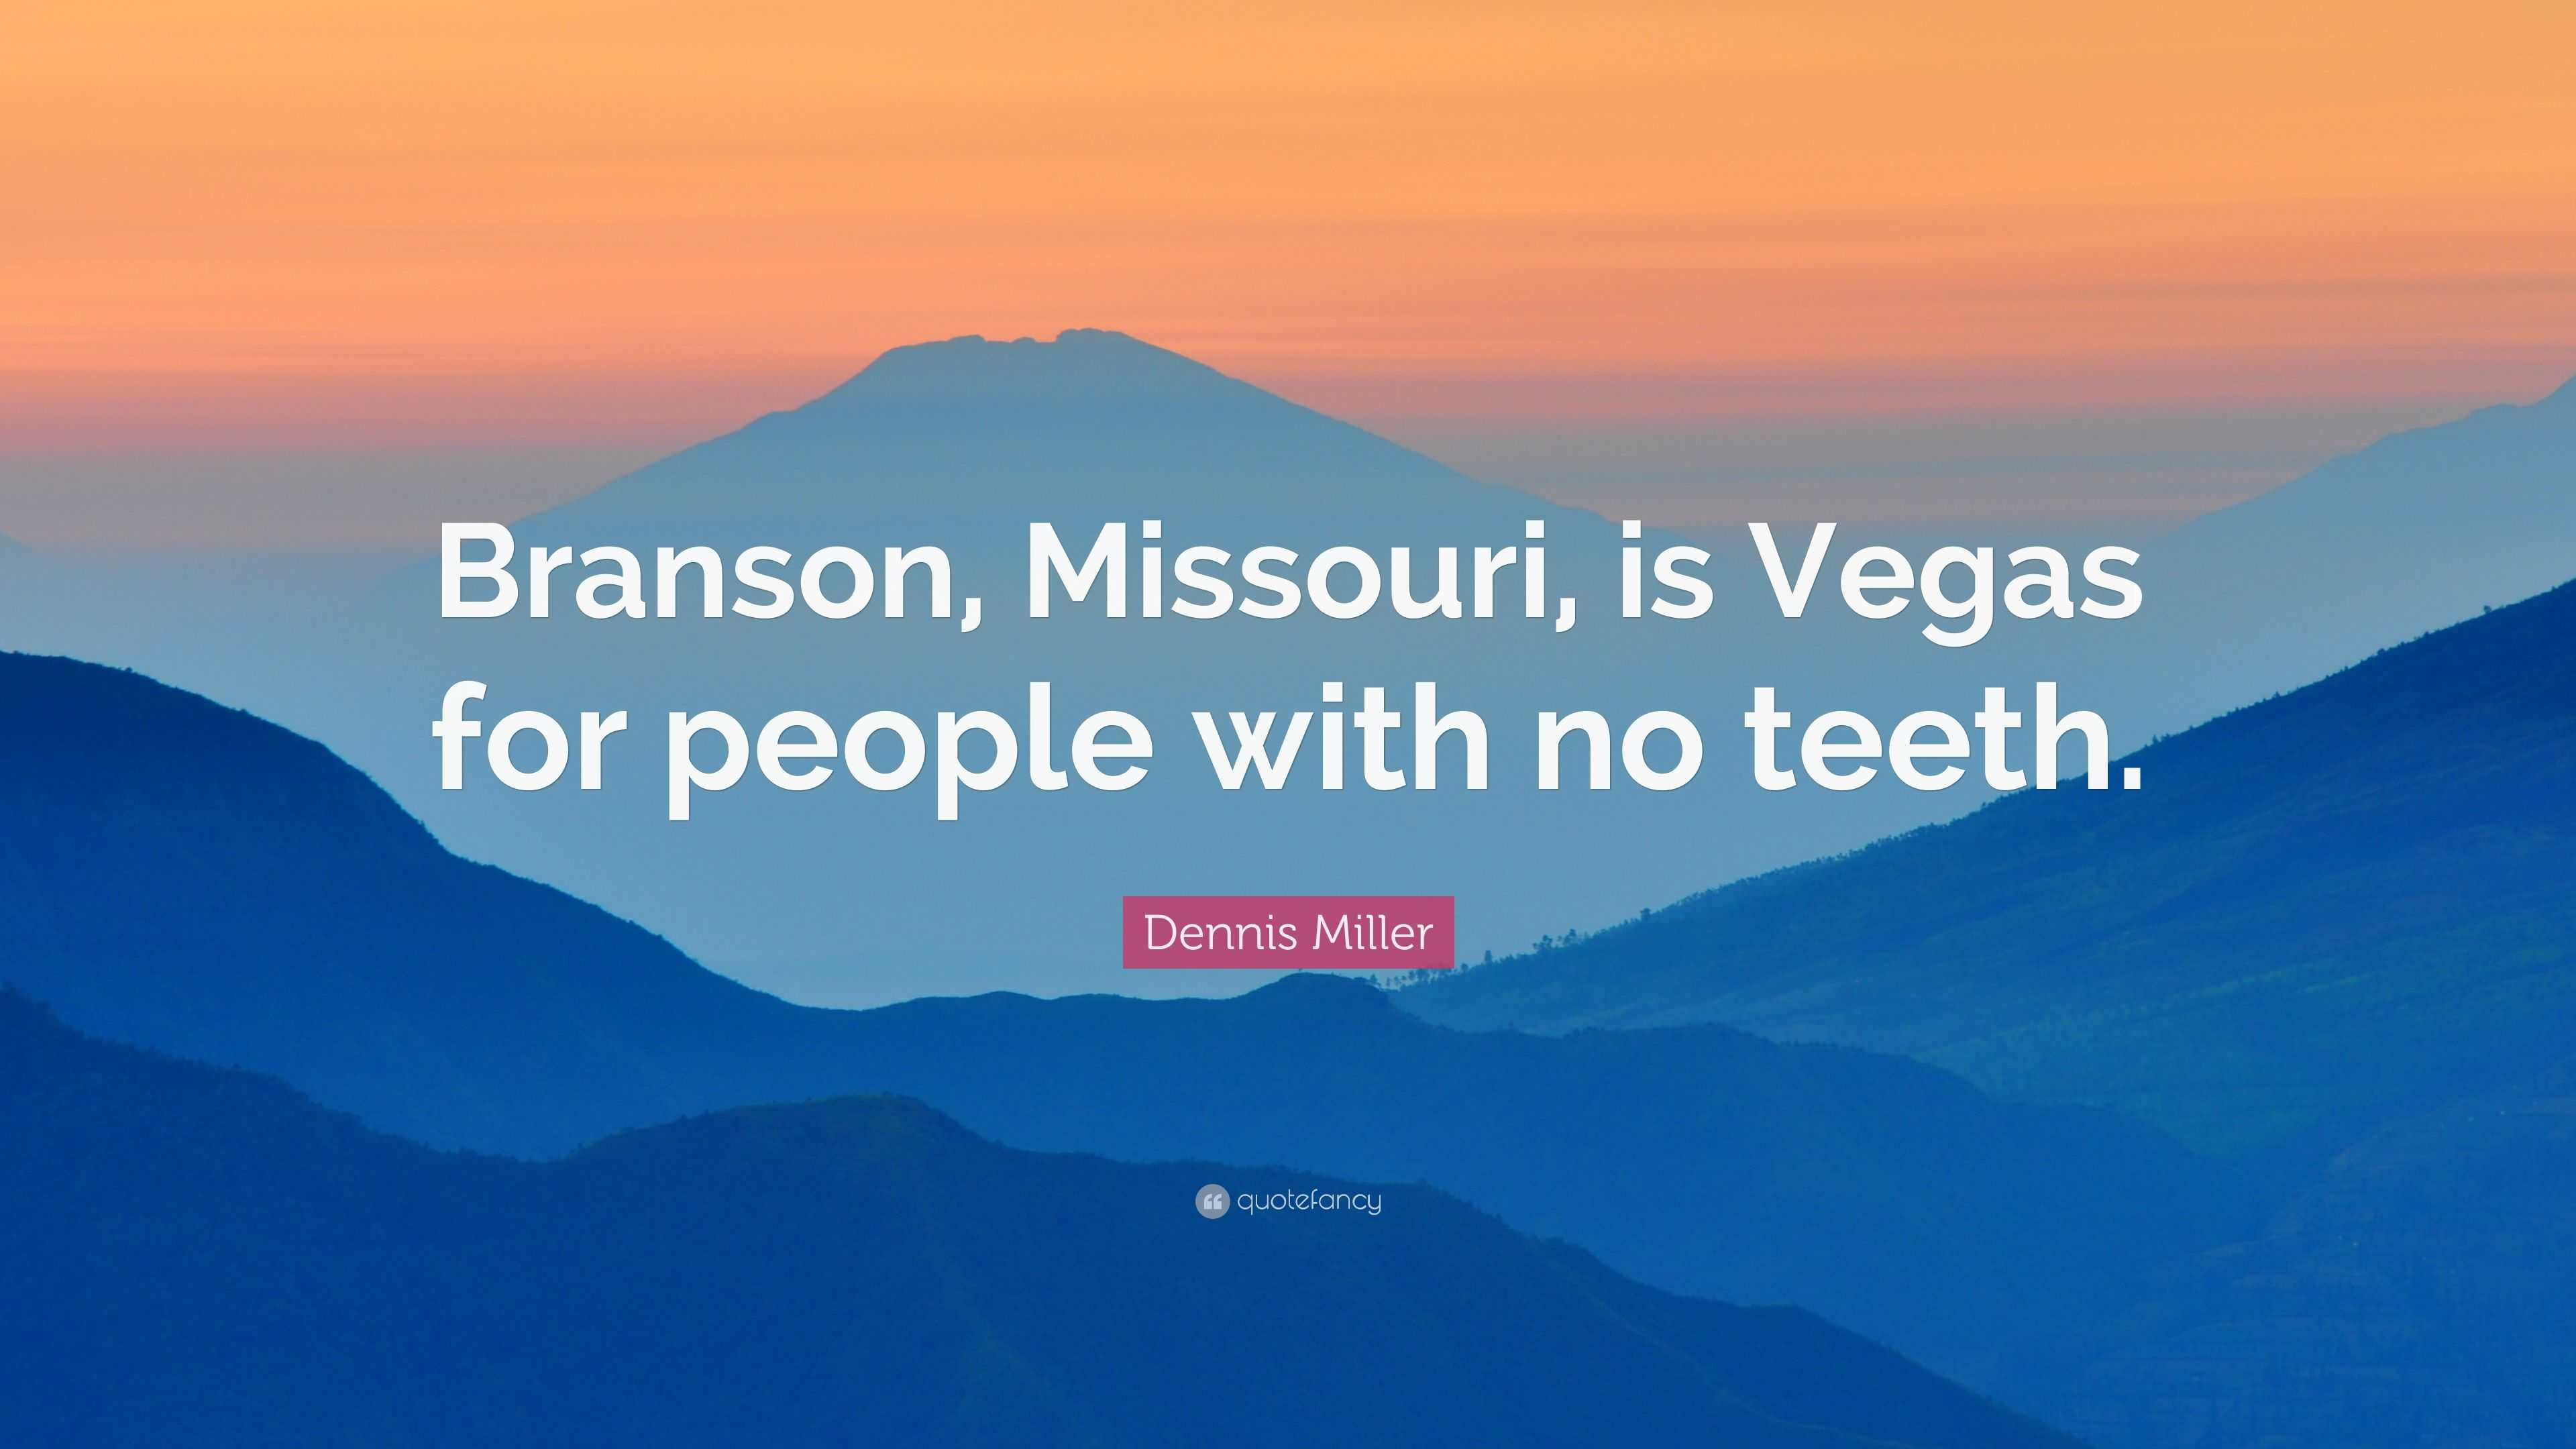 Dennis Miller Quote: "Branson, Missouri, is Vegas for people with no ...